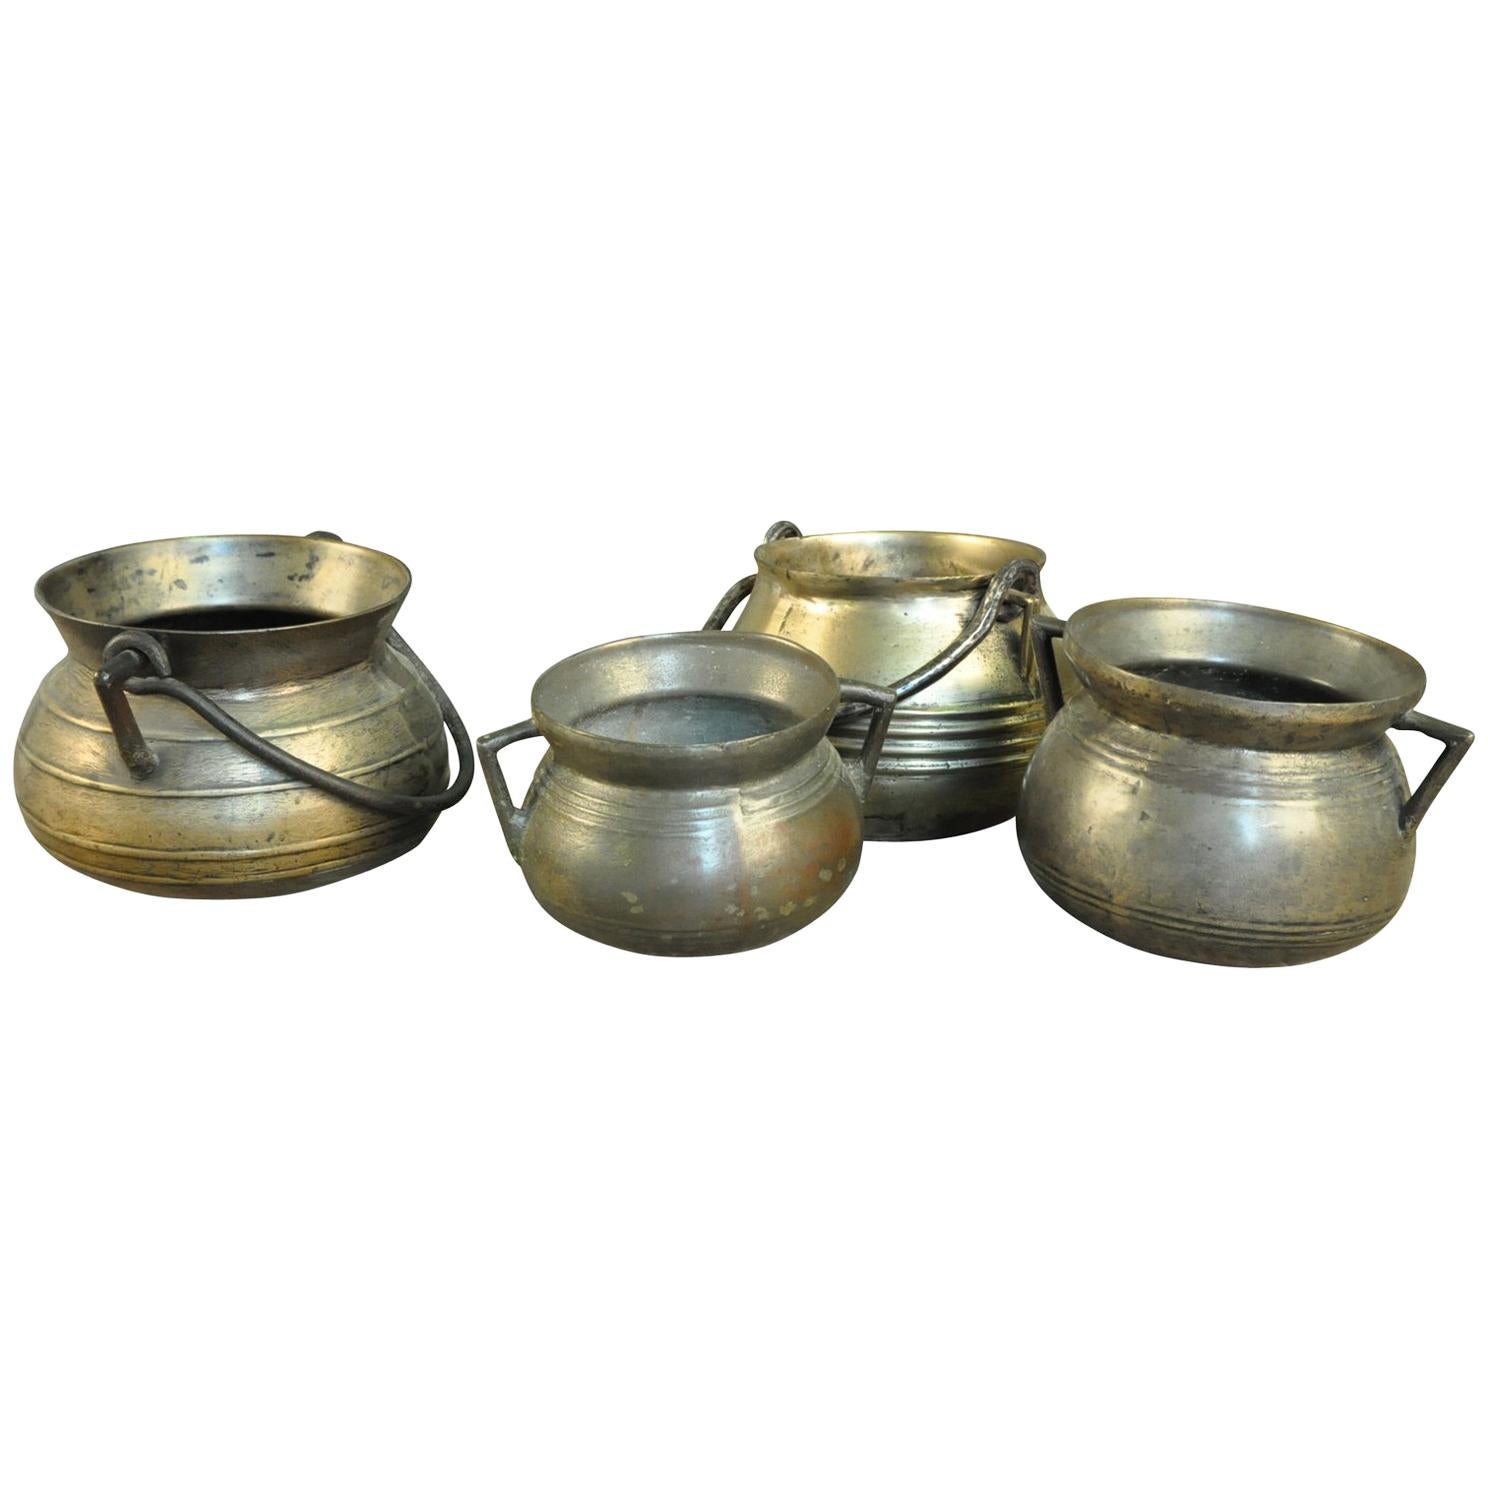 Collection of 4 Bronze Olas, Cooking Pots